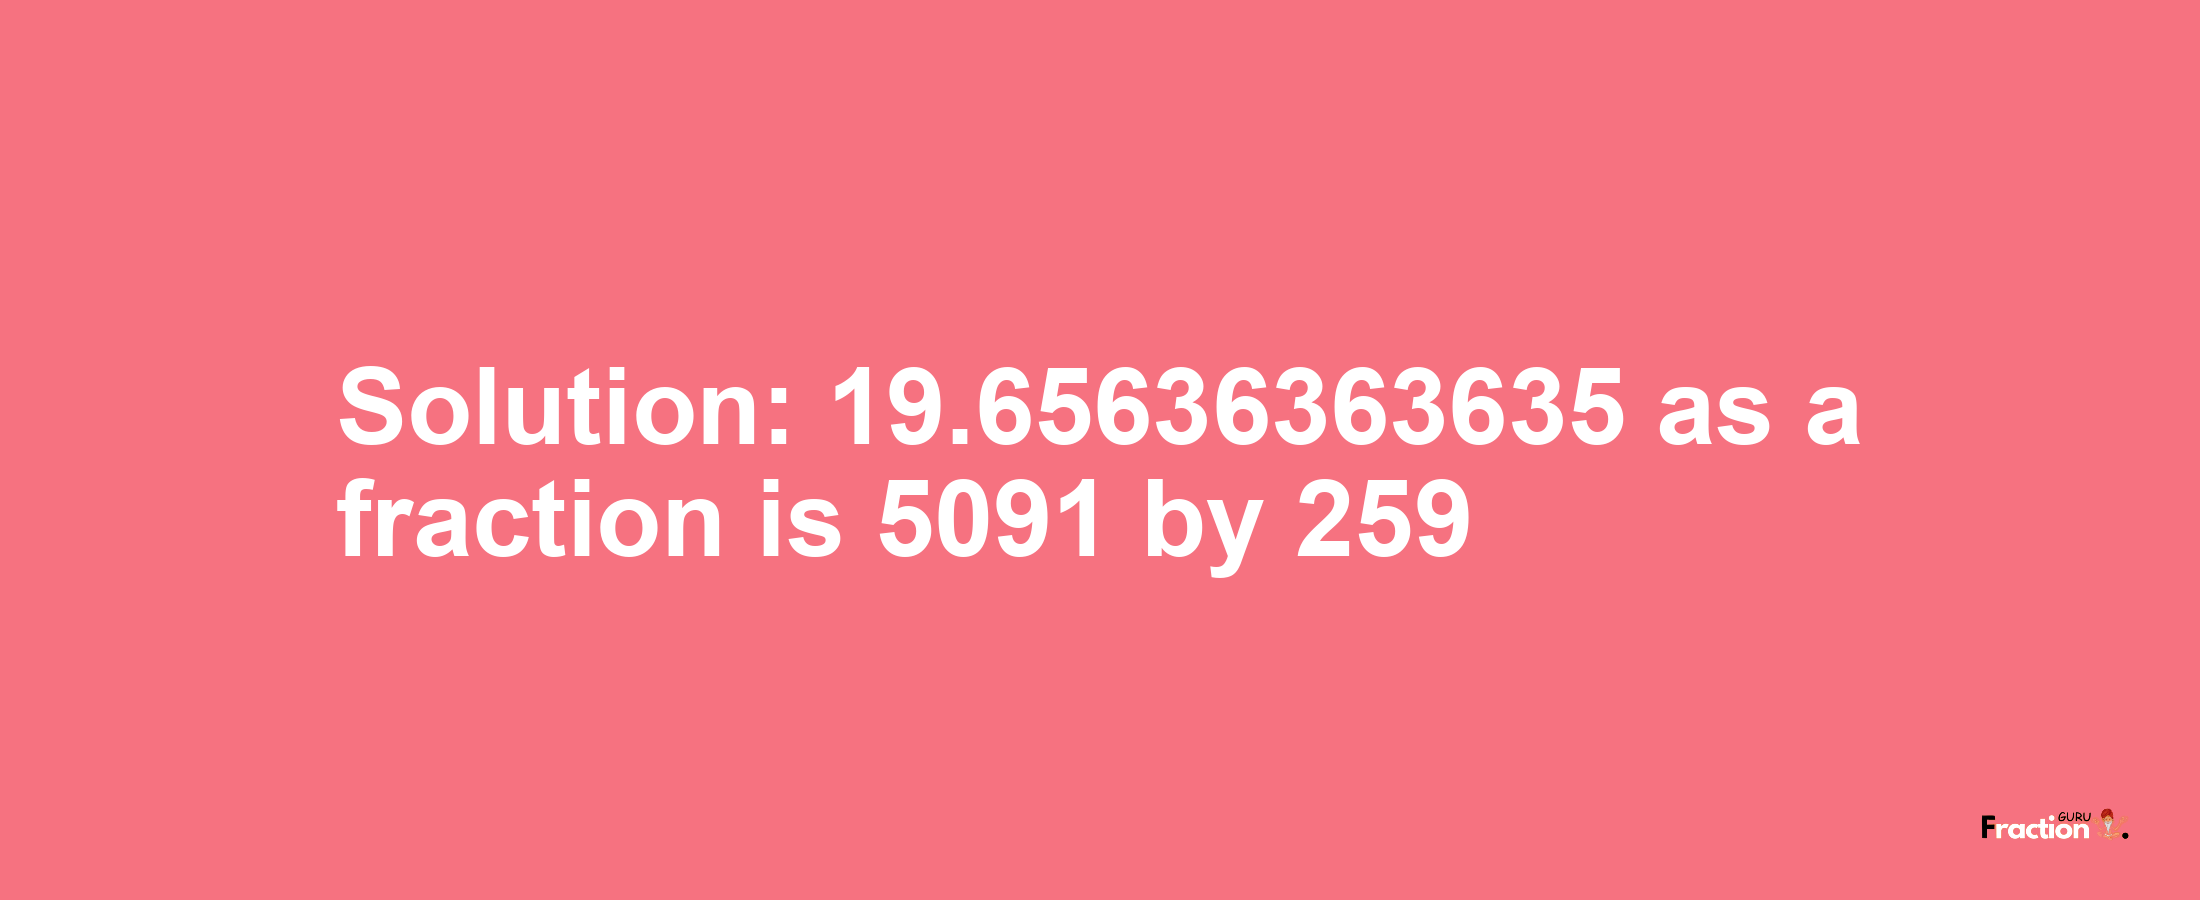 Solution:19.65636363635 as a fraction is 5091/259